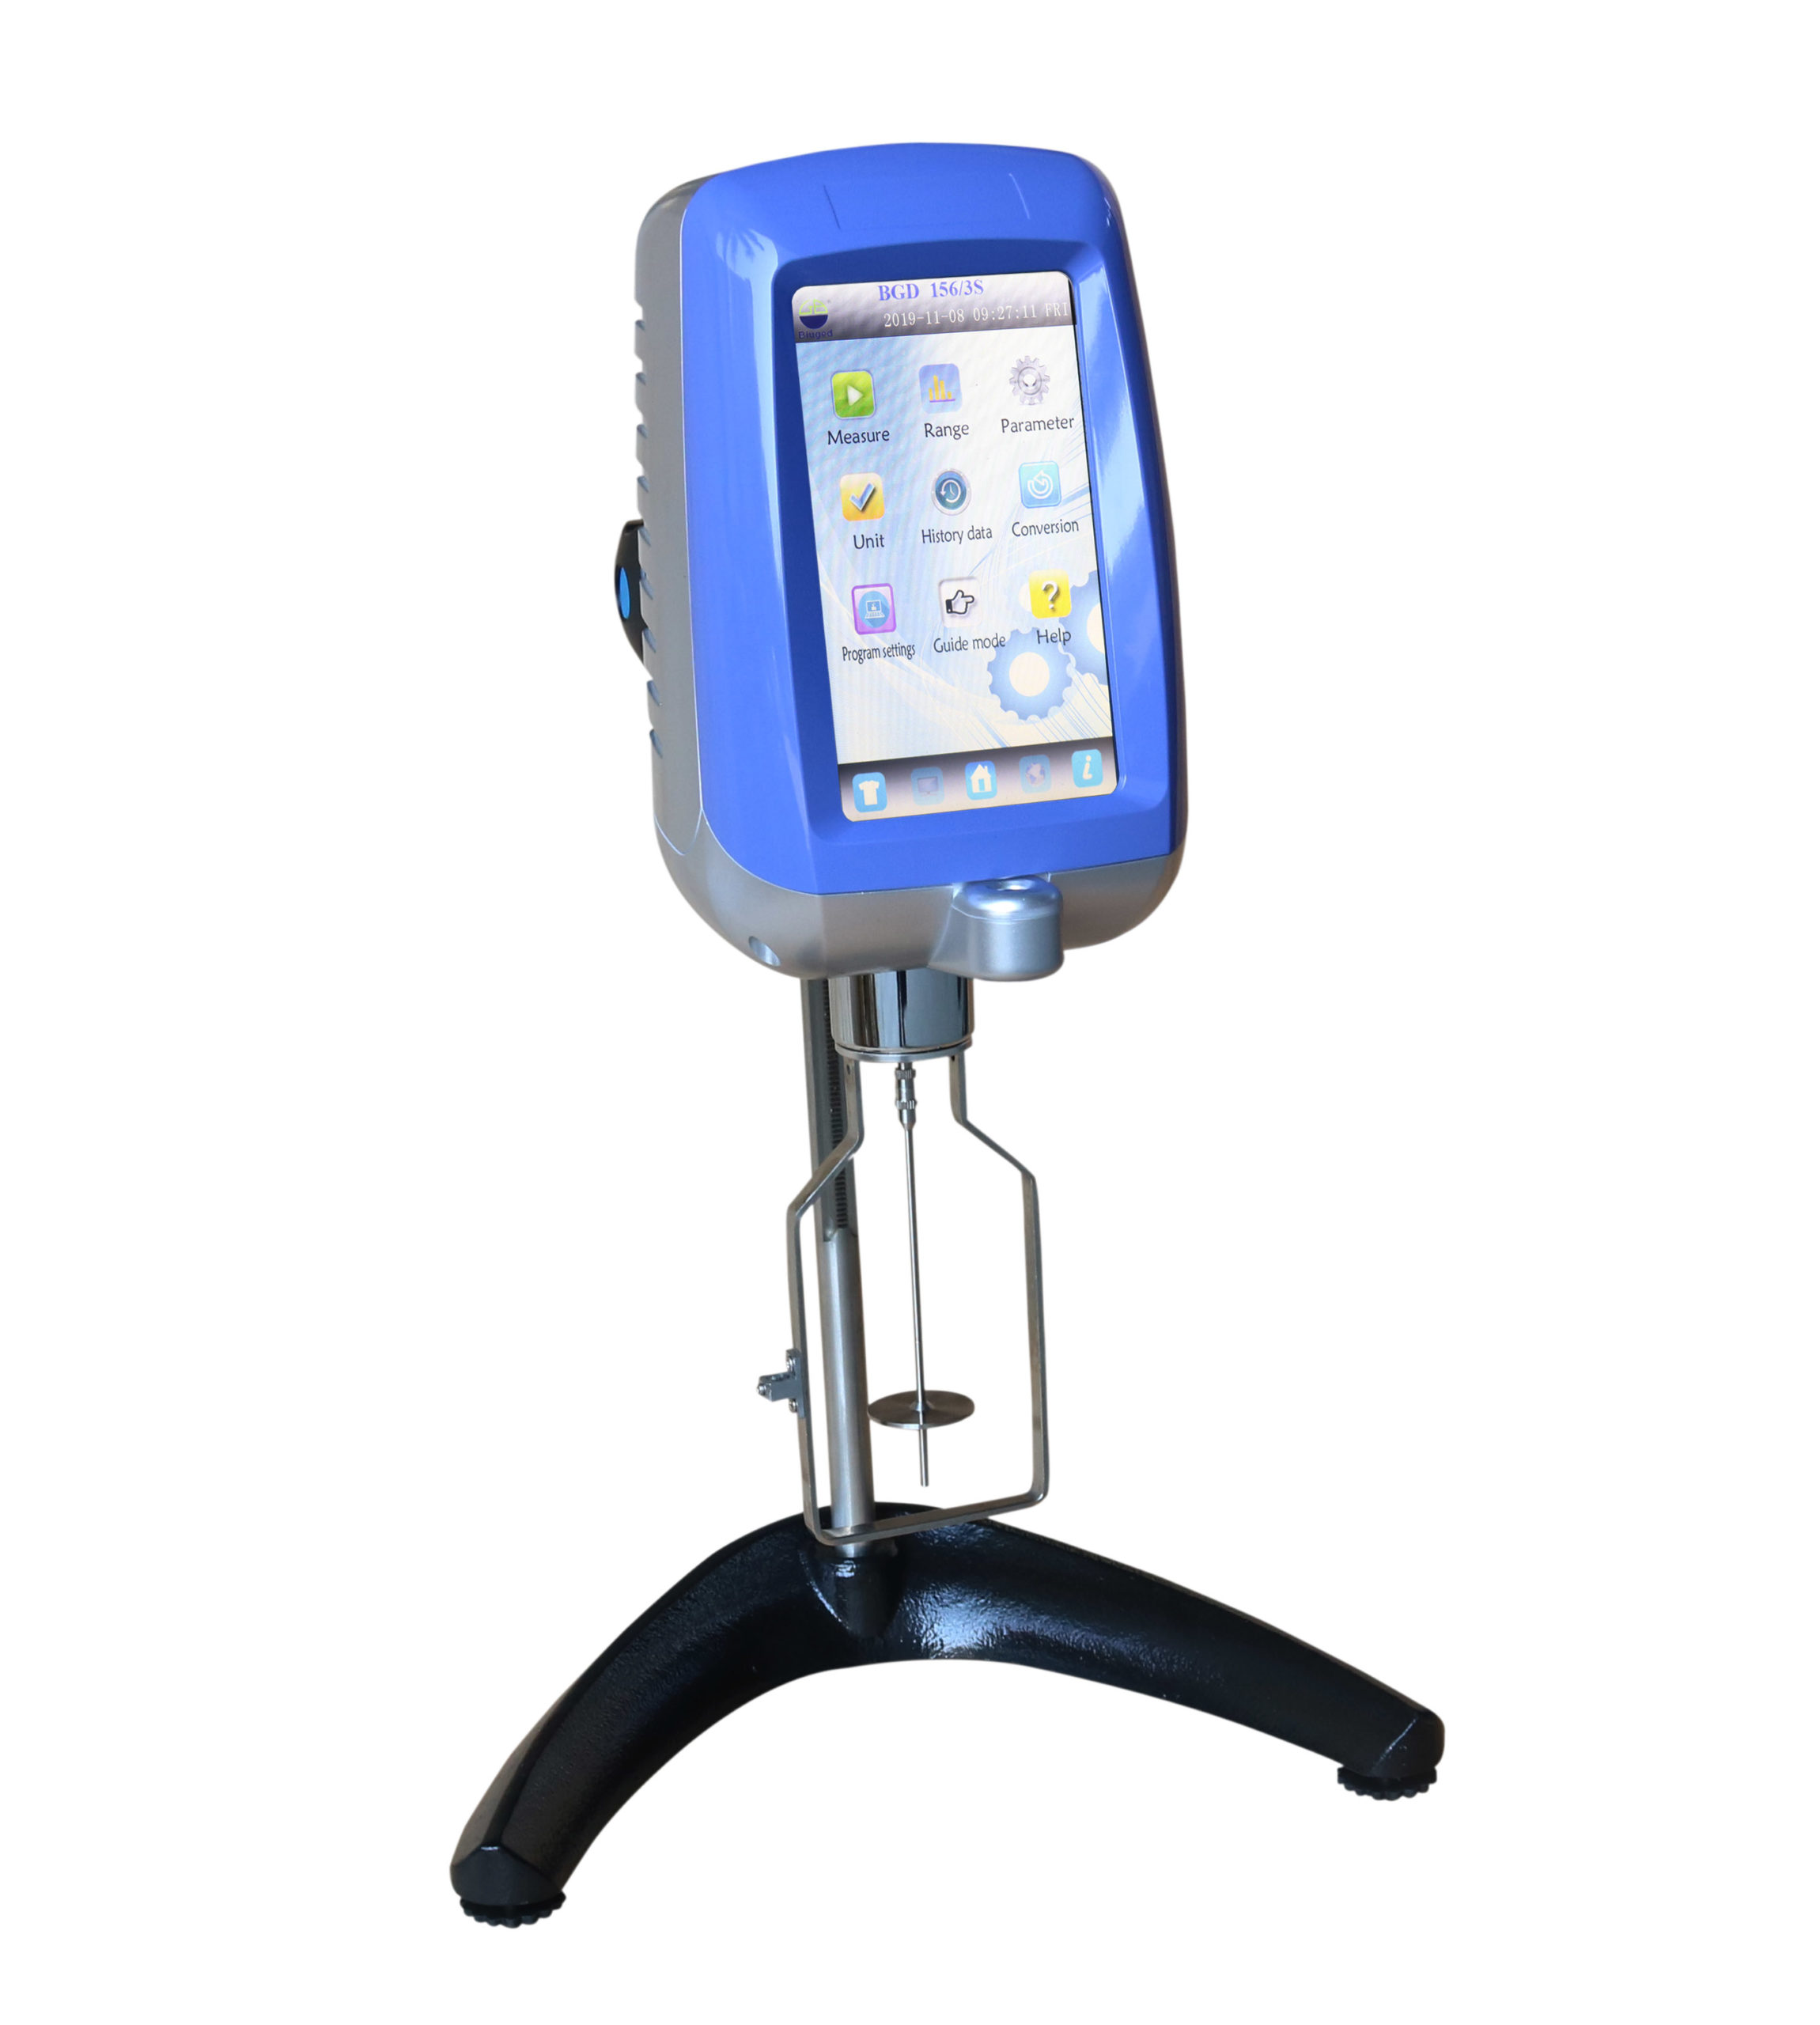 Programmable Touch-Screen Viscometer (Rheometer)